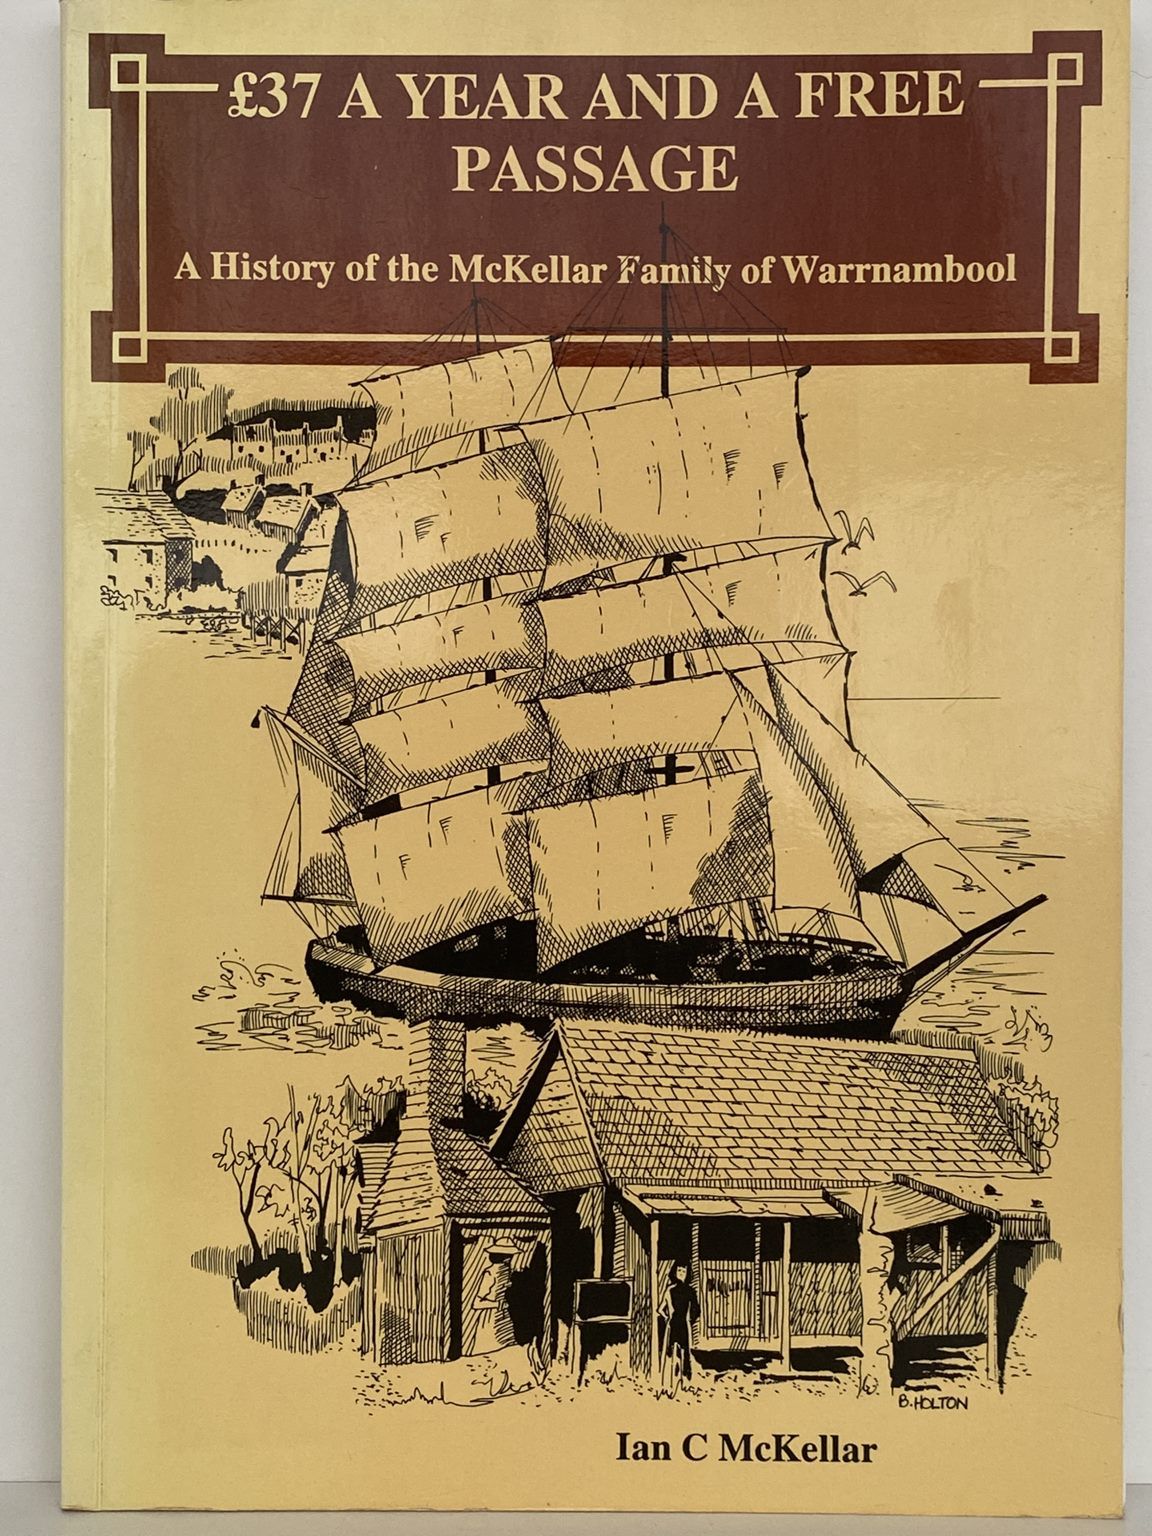 £37 A YEAR AND A FREE PASSAGE The McKellar Family Of Warrnambool